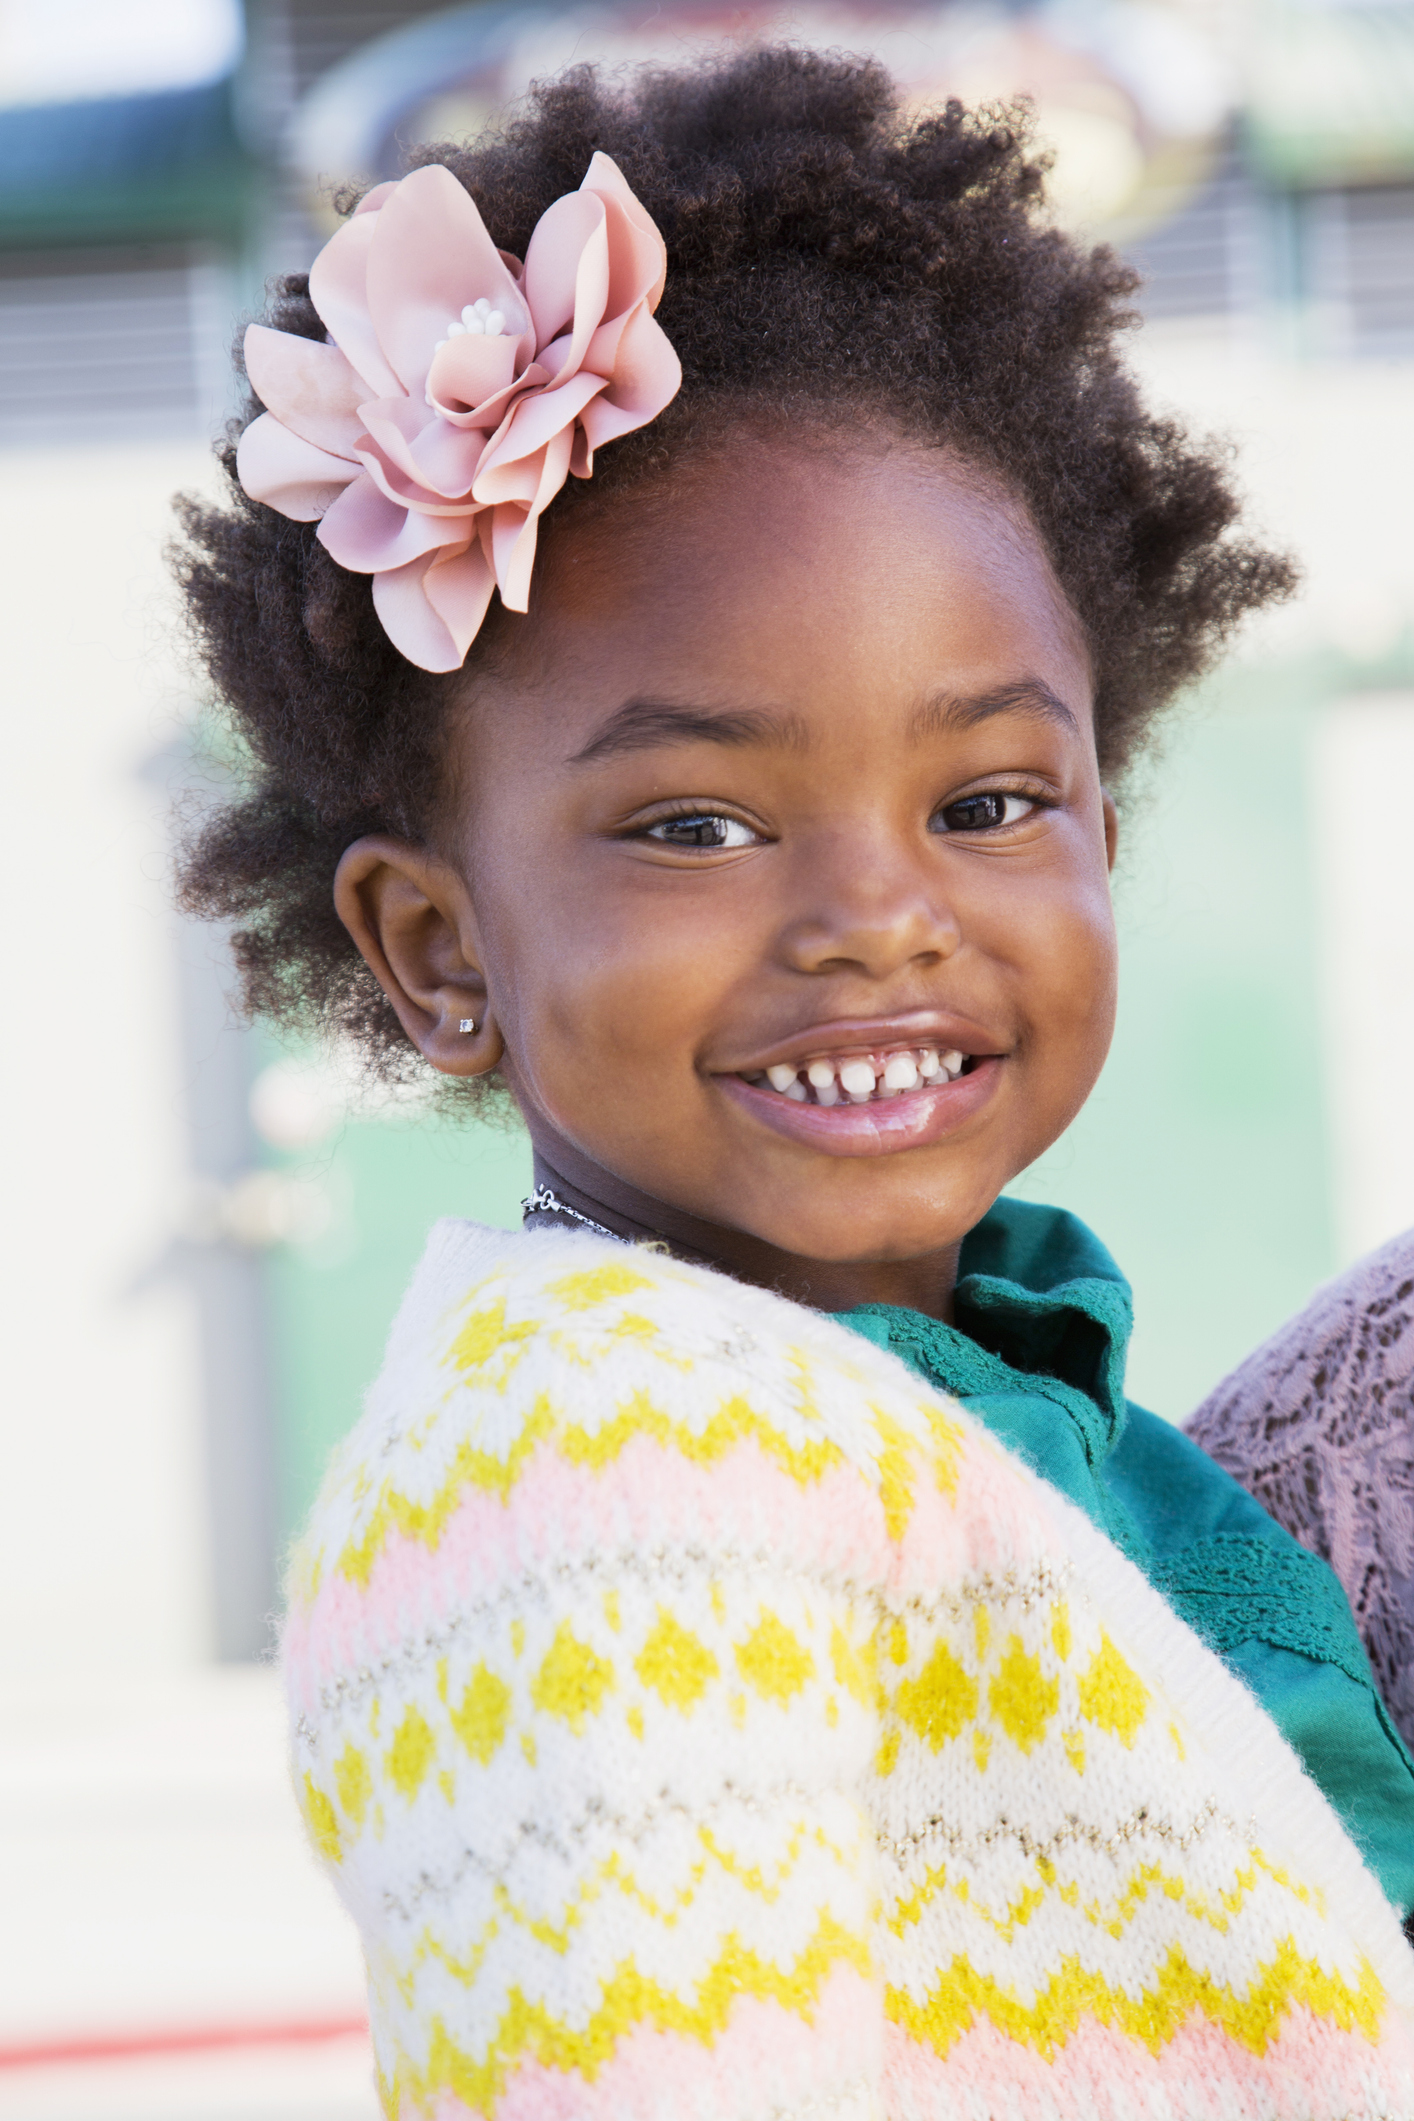 Portrait of smiling black girl with flower in hair